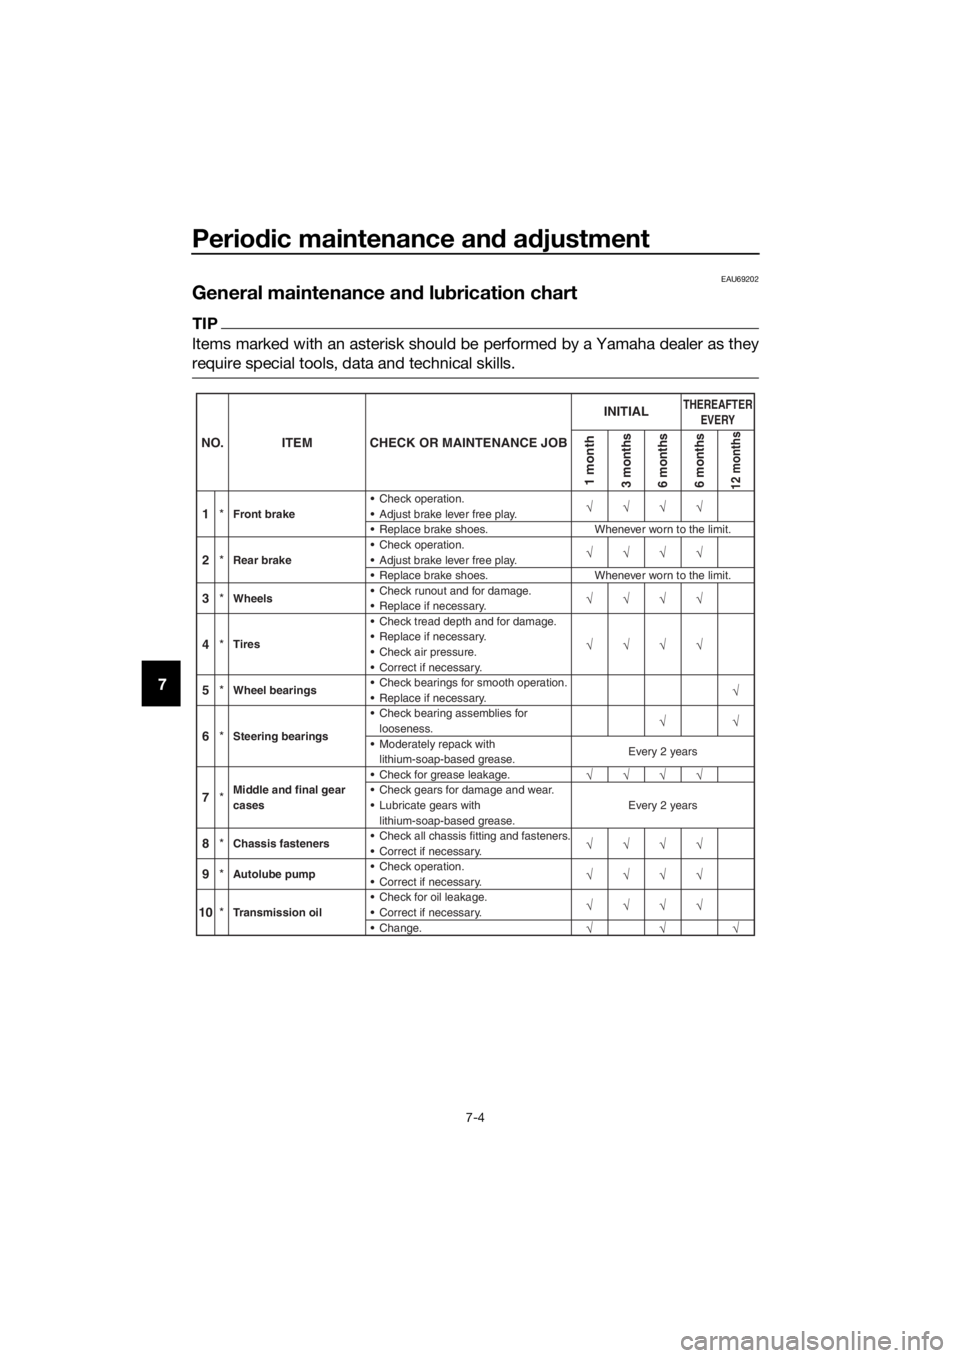 YAMAHA PW50 2020  Owners Manual Periodic maintenance an d a djustment
7-4
7
EAU69202
General maintenance and  lubrication chart
TIP
Items marked with an asterisk should be performed by a Yamaha dealer as they
require special tools, 